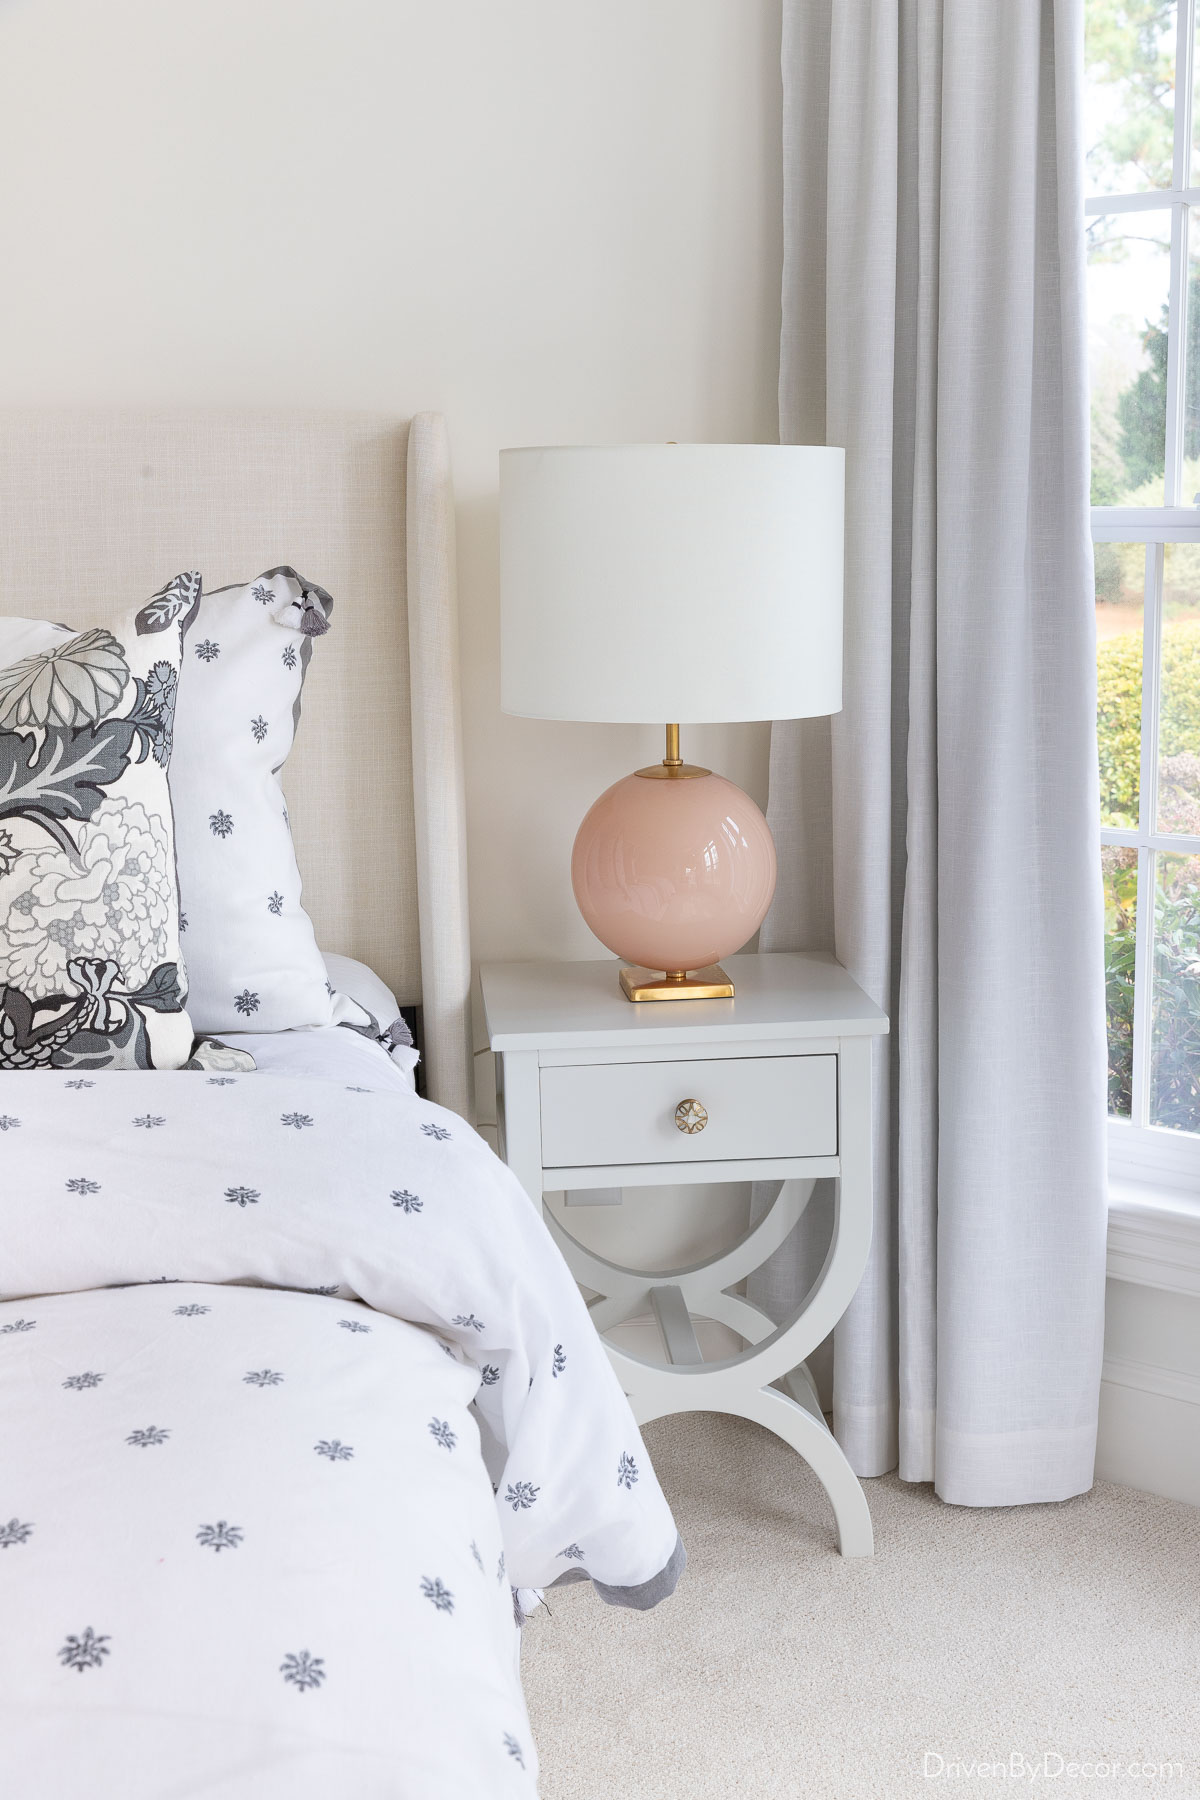 Blush bedroom lamp on nightstand next to bed